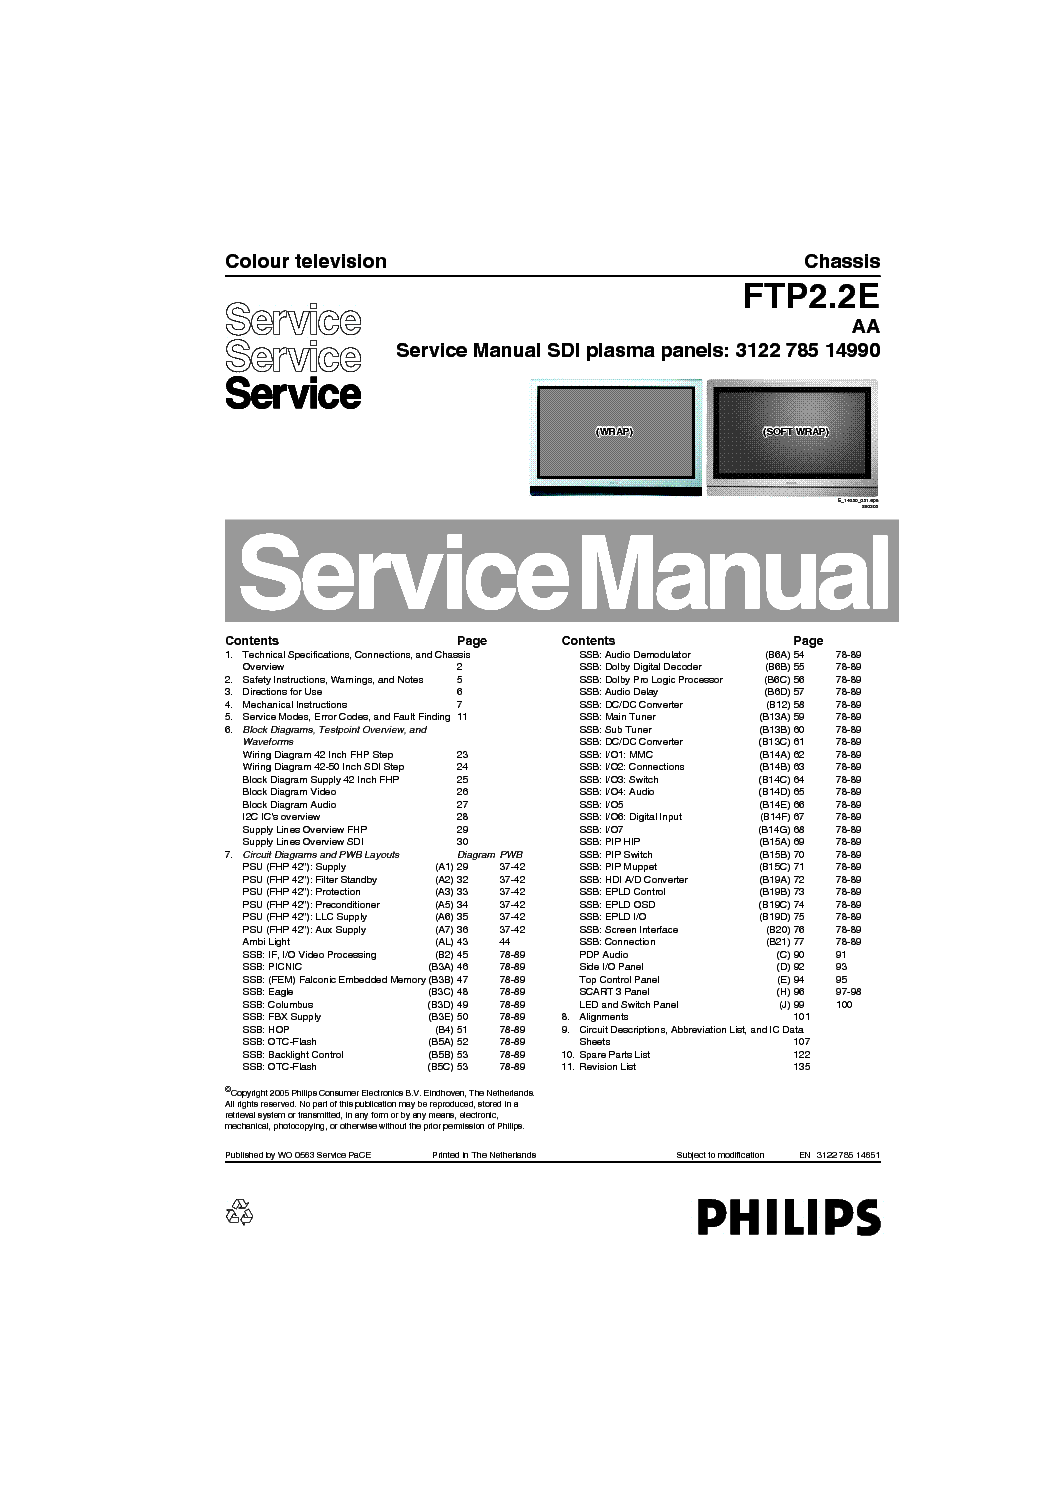 PHILIPS 50PF9966-12 312278514990 CHASSIS FTP2.2E AA SM service manual (1st page)